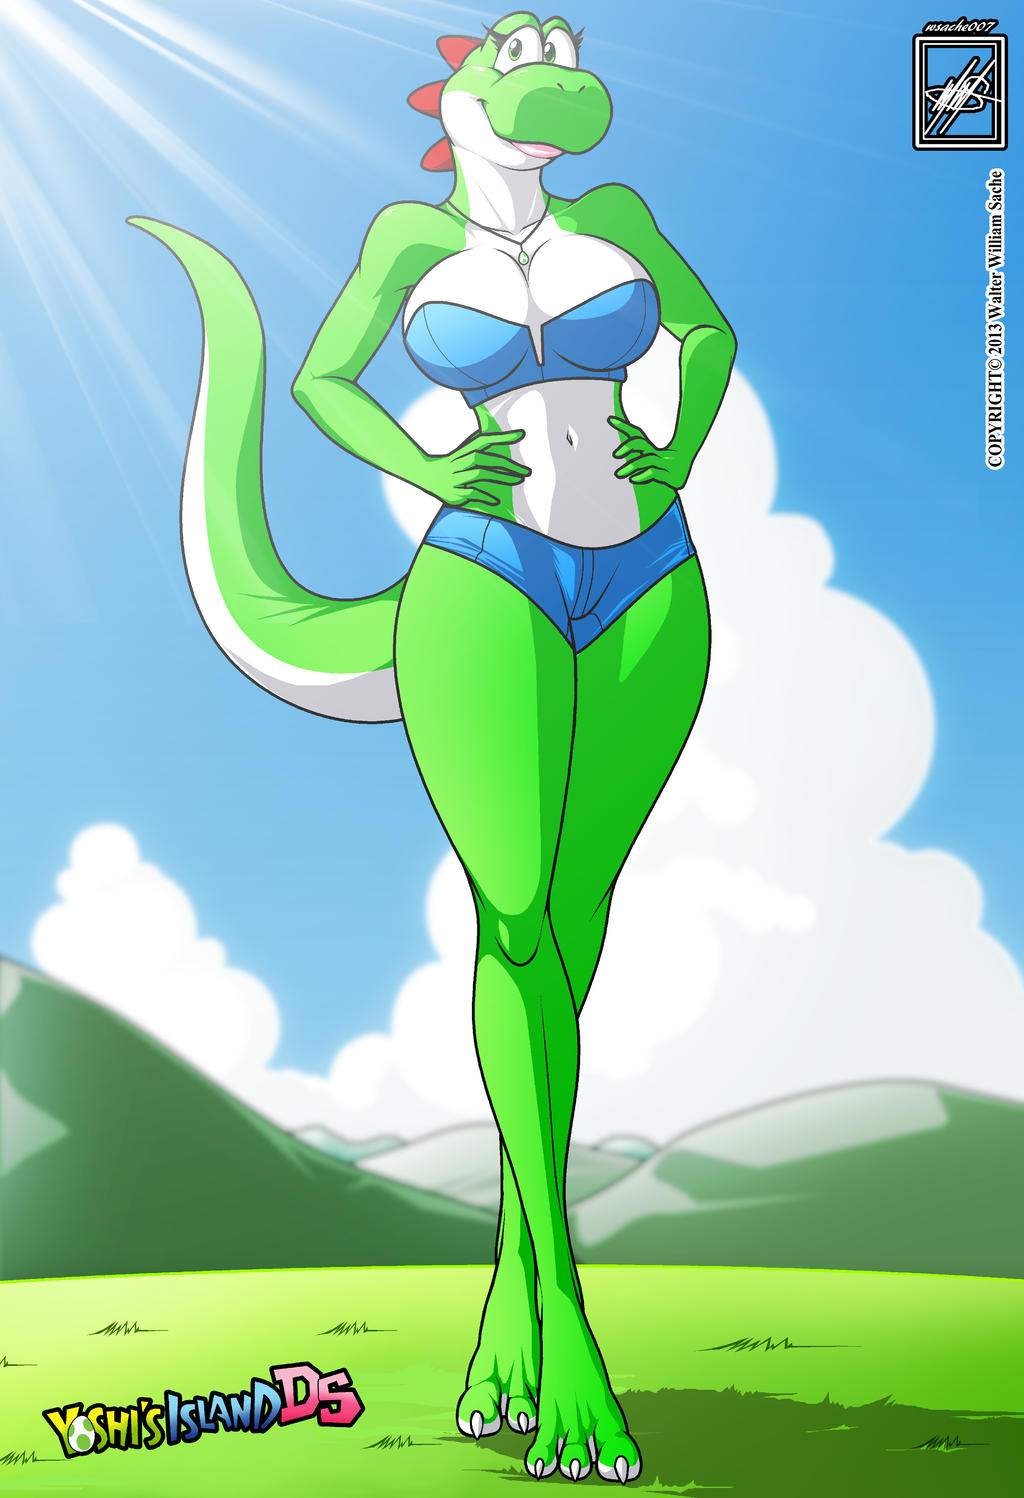 http://img06.deviantart.net/61fe/i/2013/191/c/2/female_yoshi_gal_completed_x3_by_wsache007-d6cup68.jpg